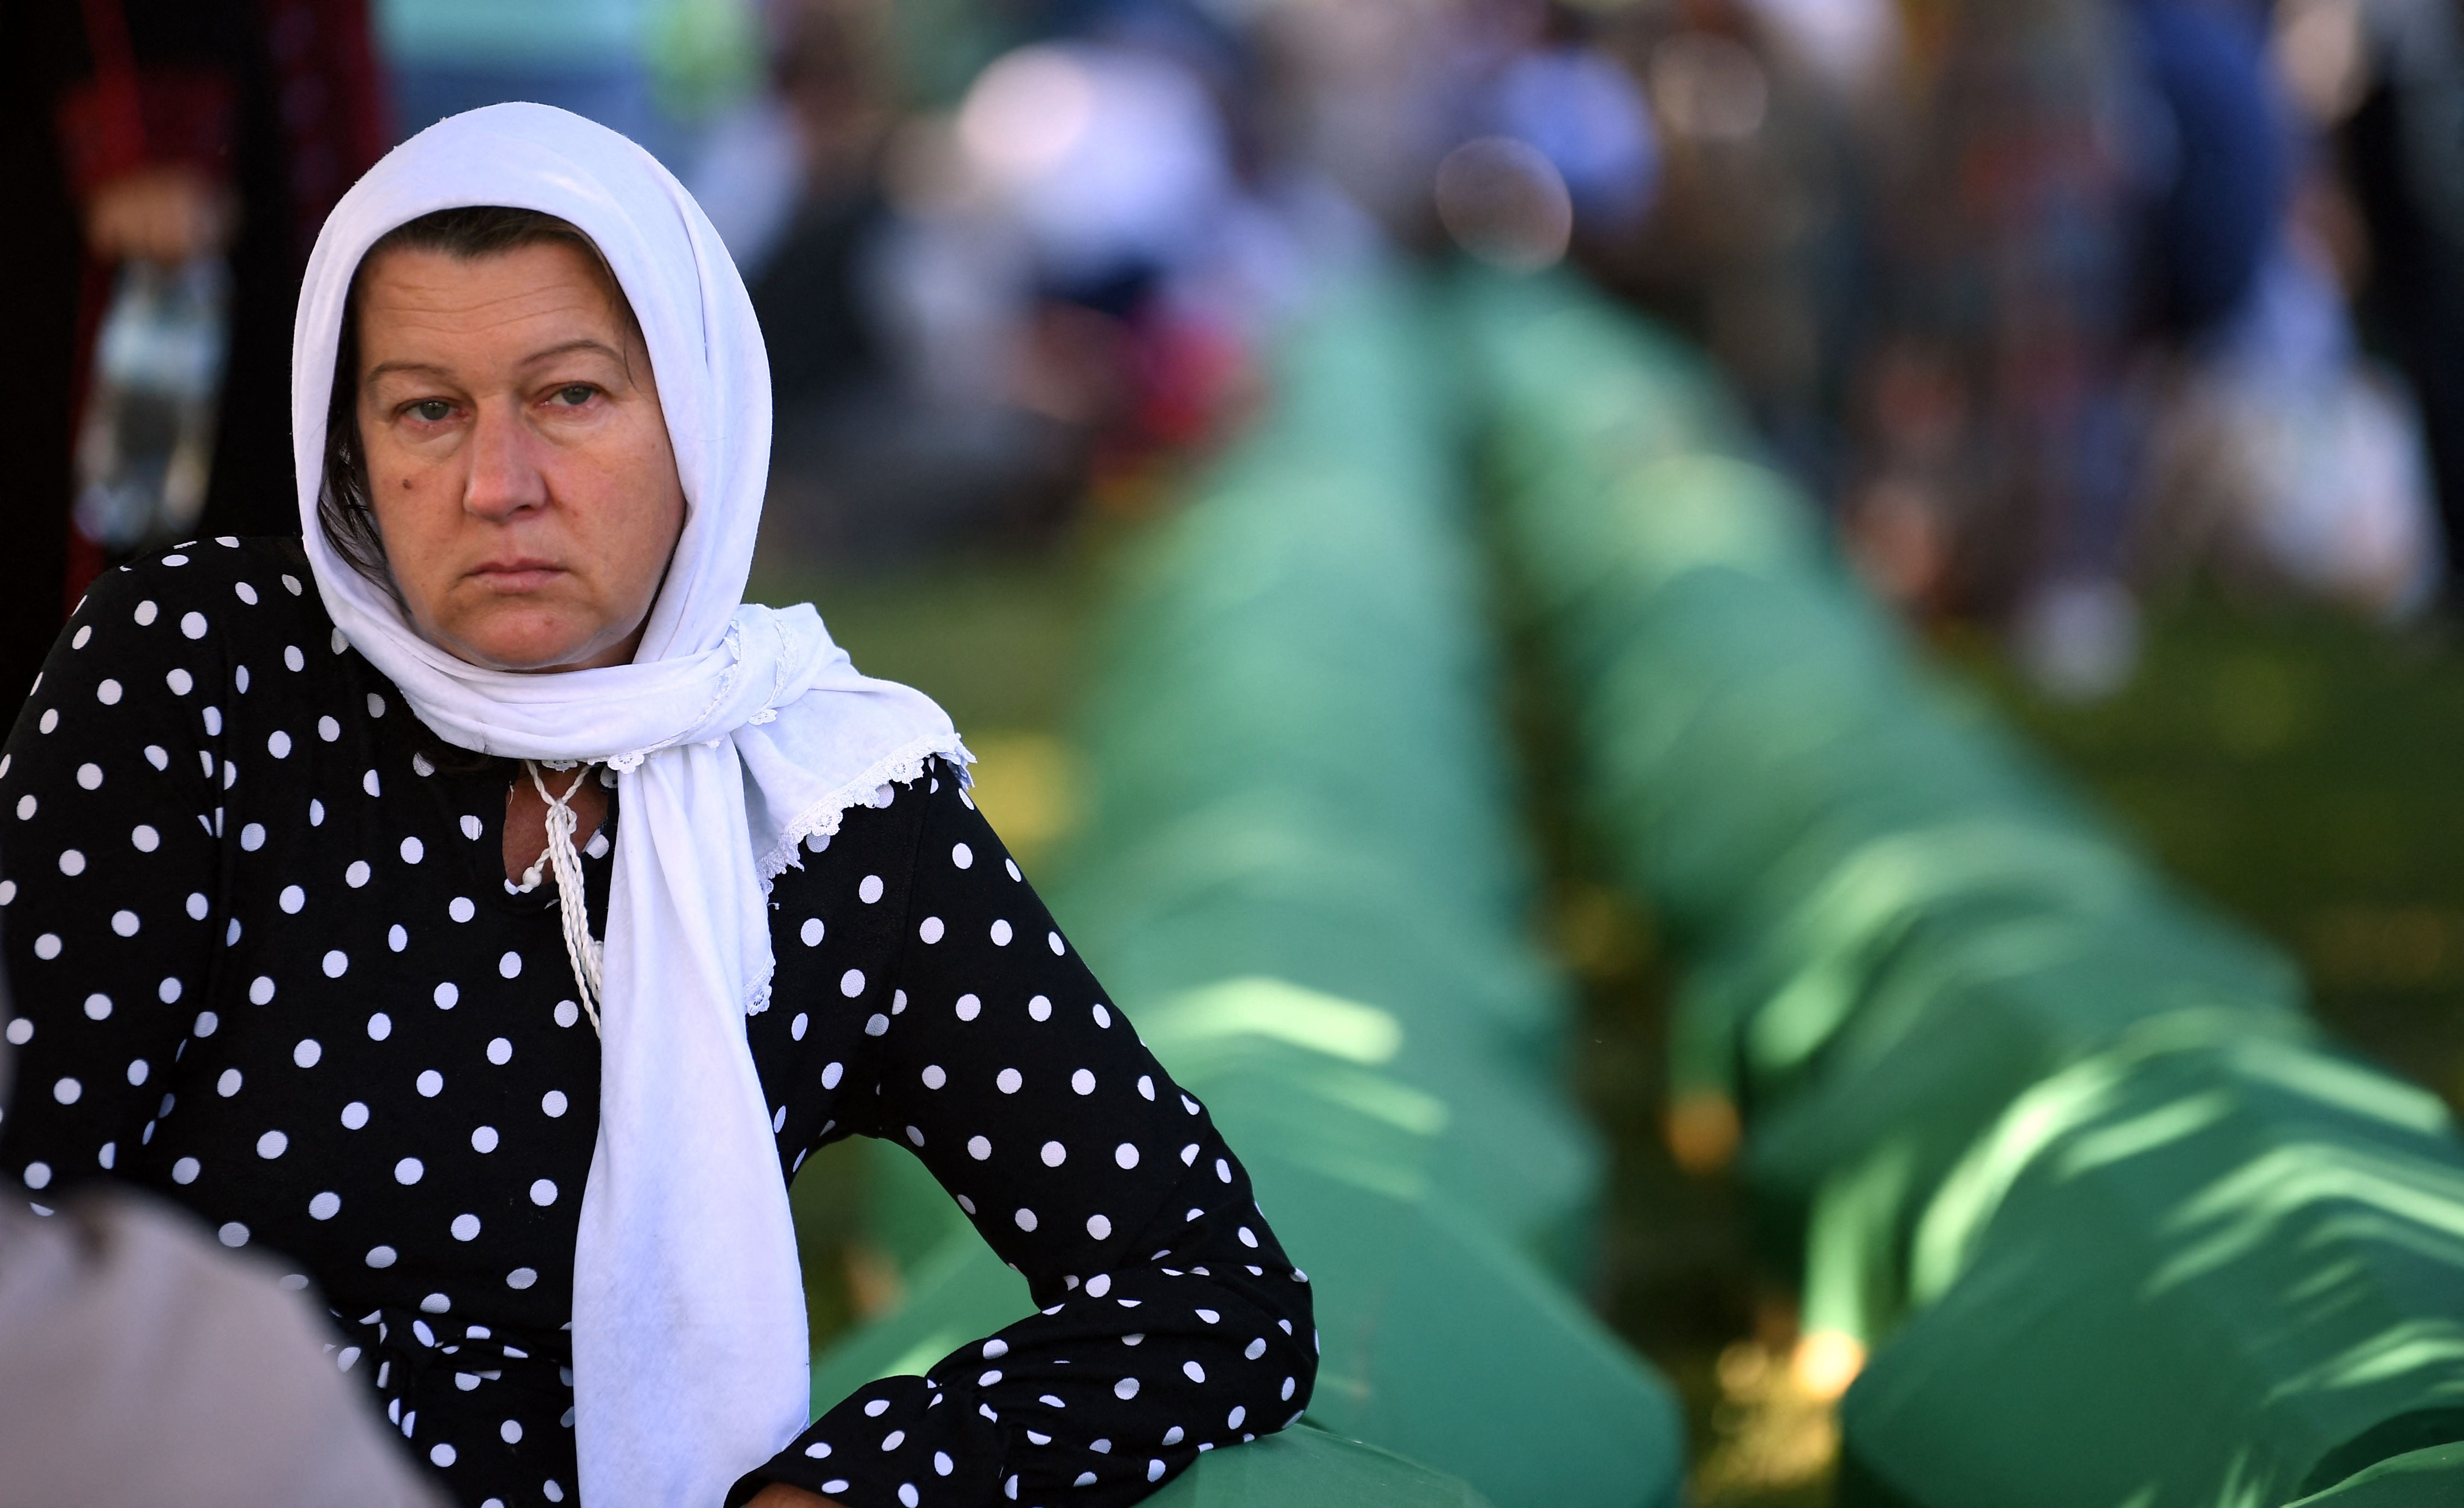 A Bosnian Muslim woman, a survivor of the 1995 Srebrenica massacre, mourns near the caskets containing remains of her relatives, at the memorial cemetery in the village of Potocari, near the eastern Bosnian town of Srebrenica